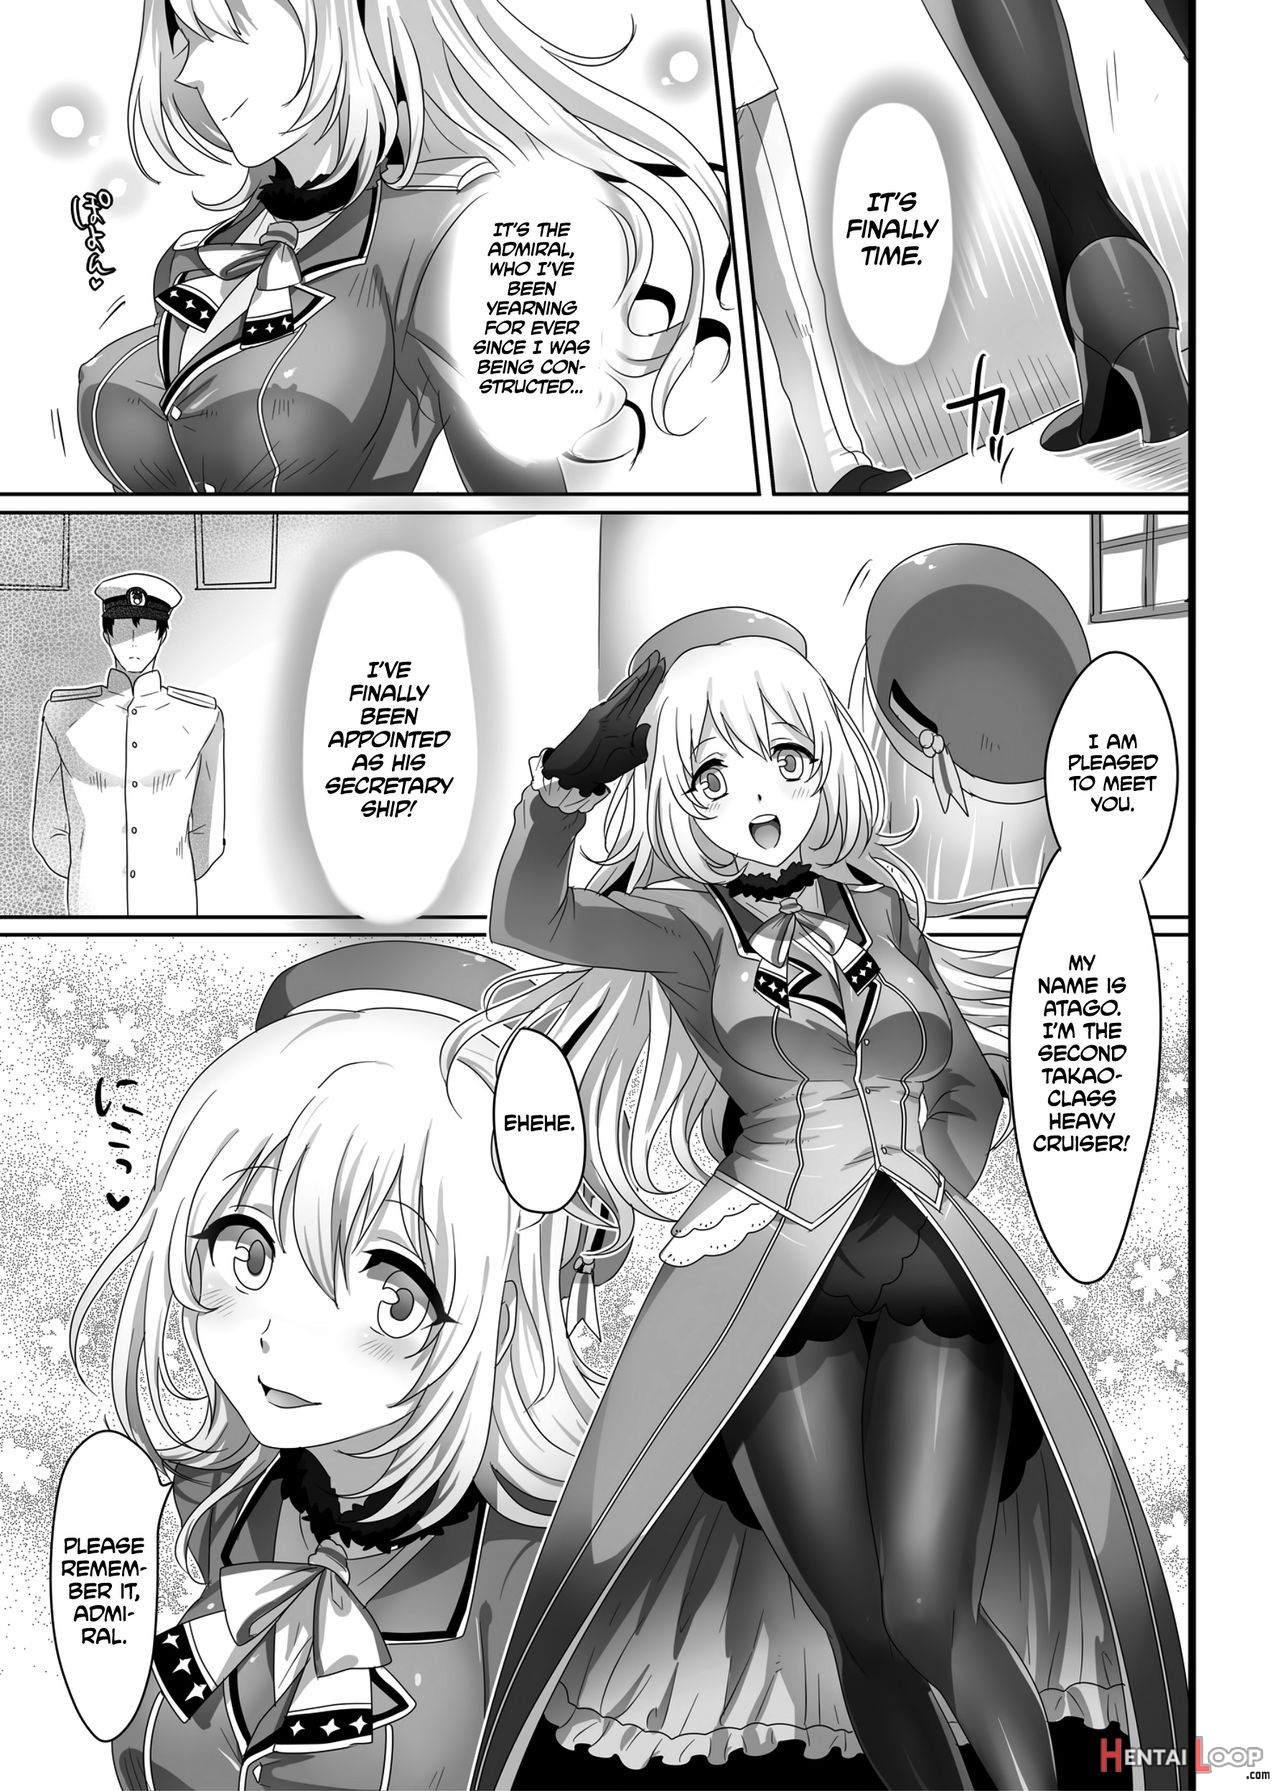 Atago's First Time page 2